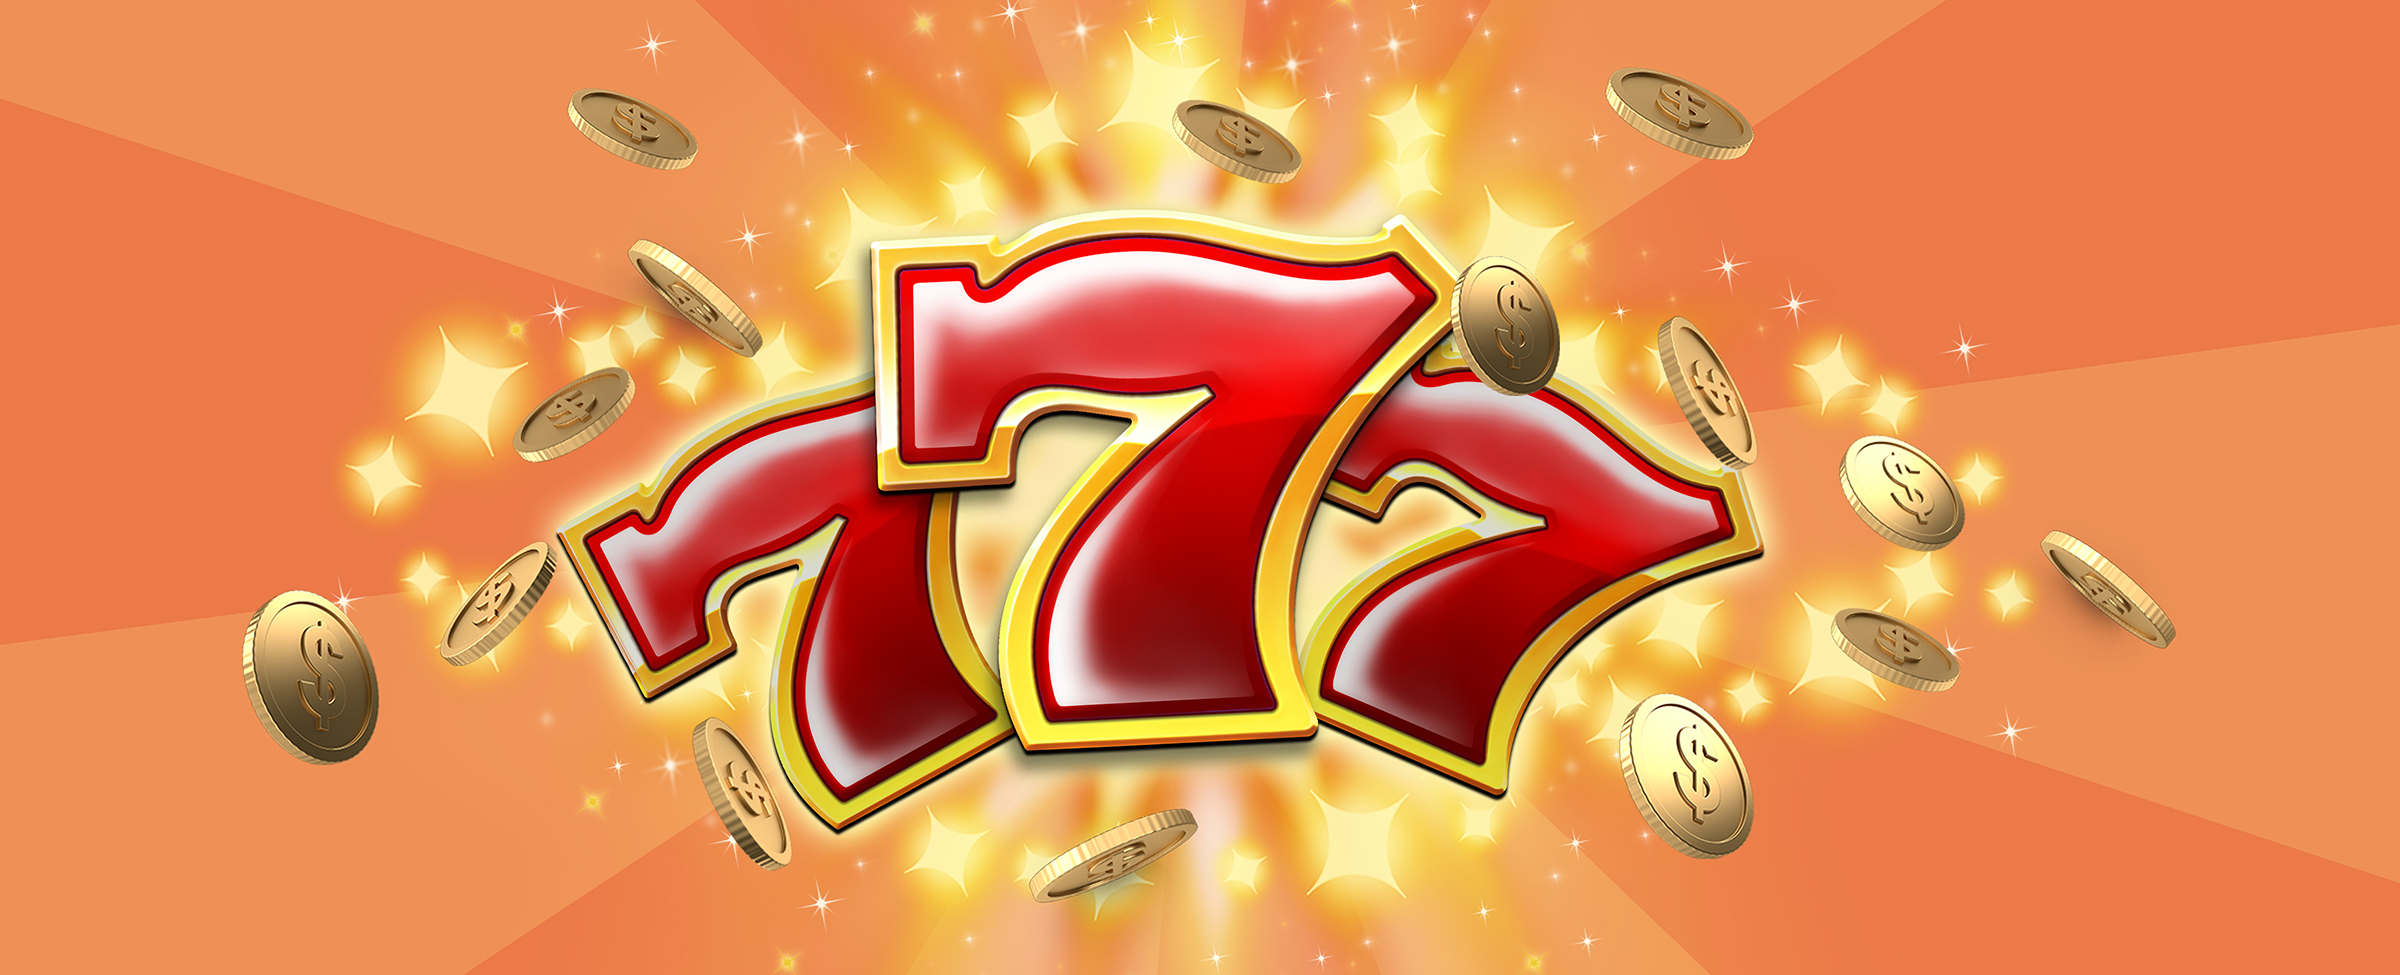 Three red 7s from the Cafe Casino online slots game Ten Times Vegas are displayed in the center, with a luminary gold sparkle around them. Coins fall around them also.